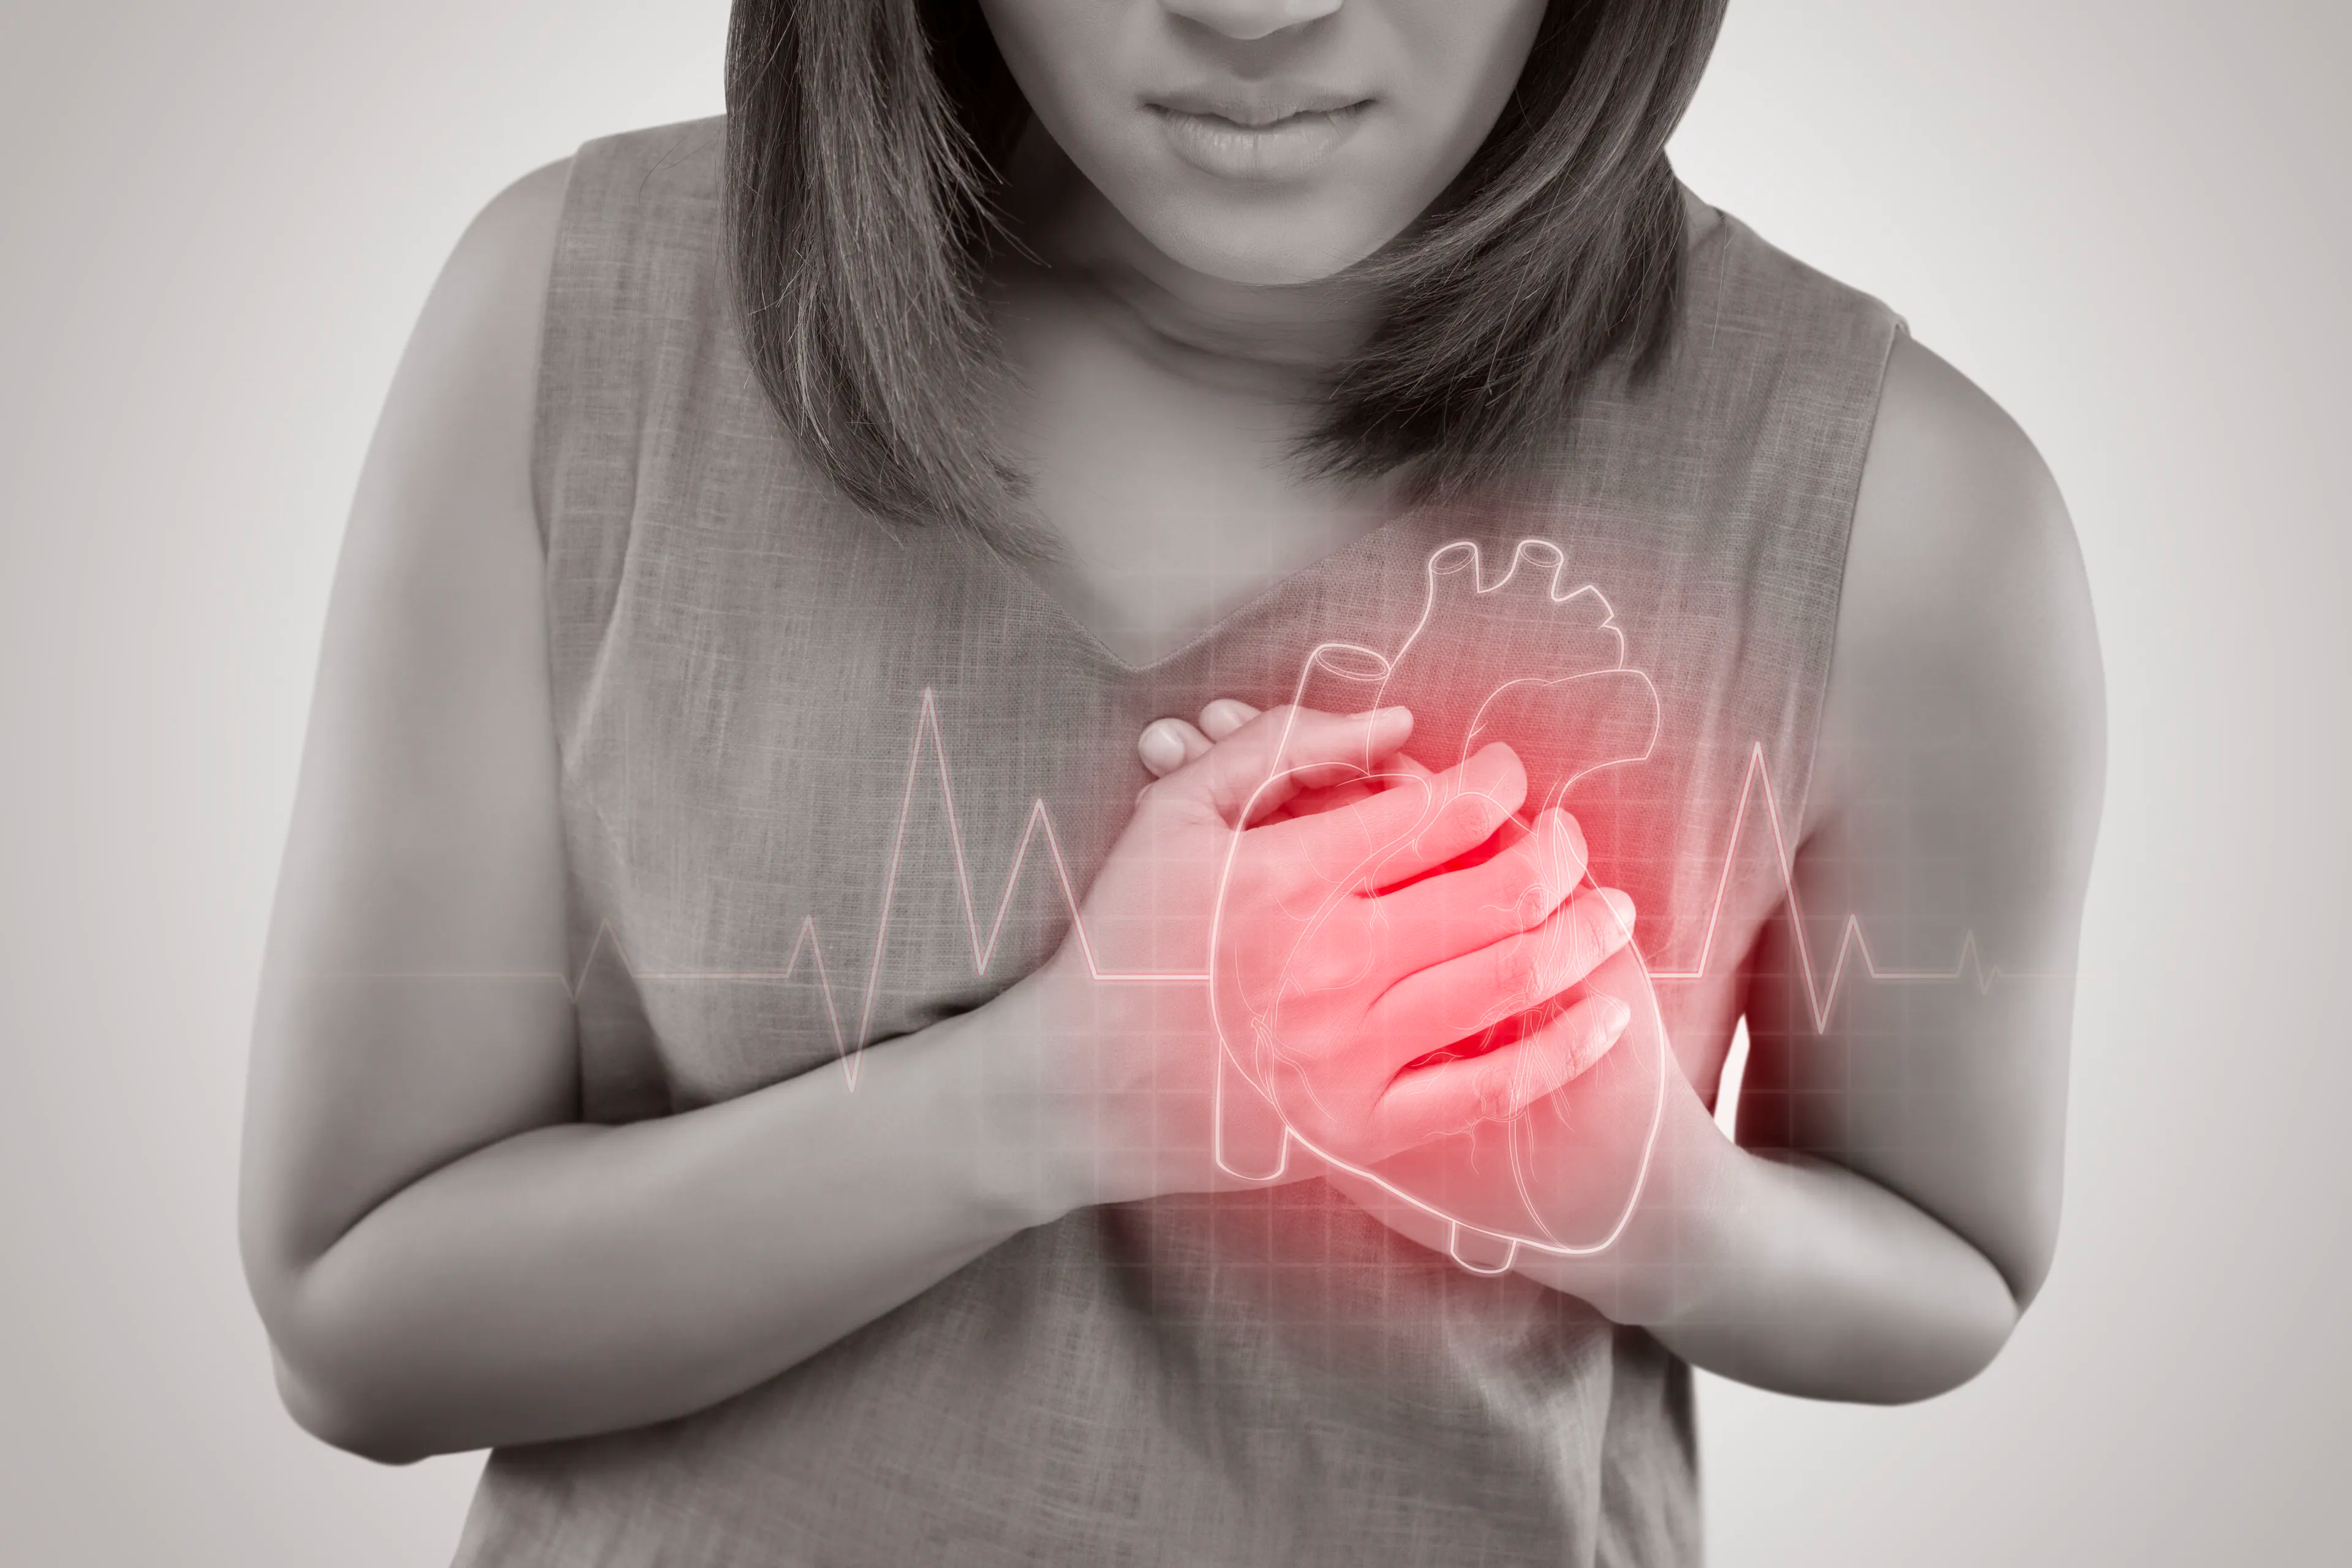 In a recent study, cardiovascular disease events were seen more often in women with irregular or long or short menstrual cycles.